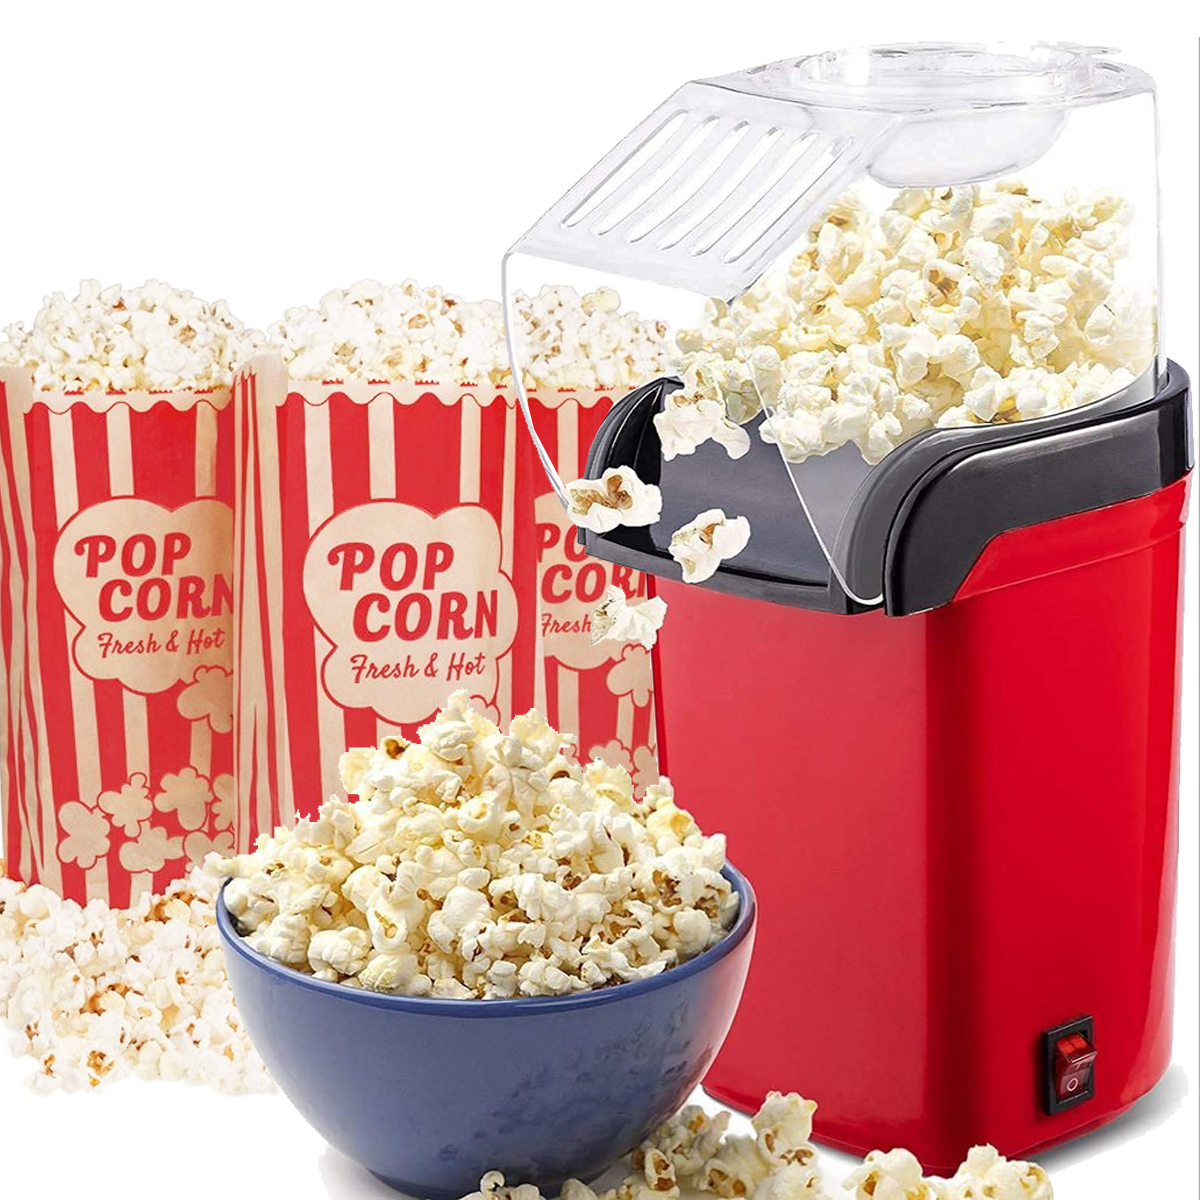 Makes Hot Attractive Design & Oil-Free Popcorn Popper Fresh Healthy & Fat-Free Theater Style Popcorn Anytime 2 Years Warranty On/Off Switch Geepas 1200W Electric Popcorn Maker 